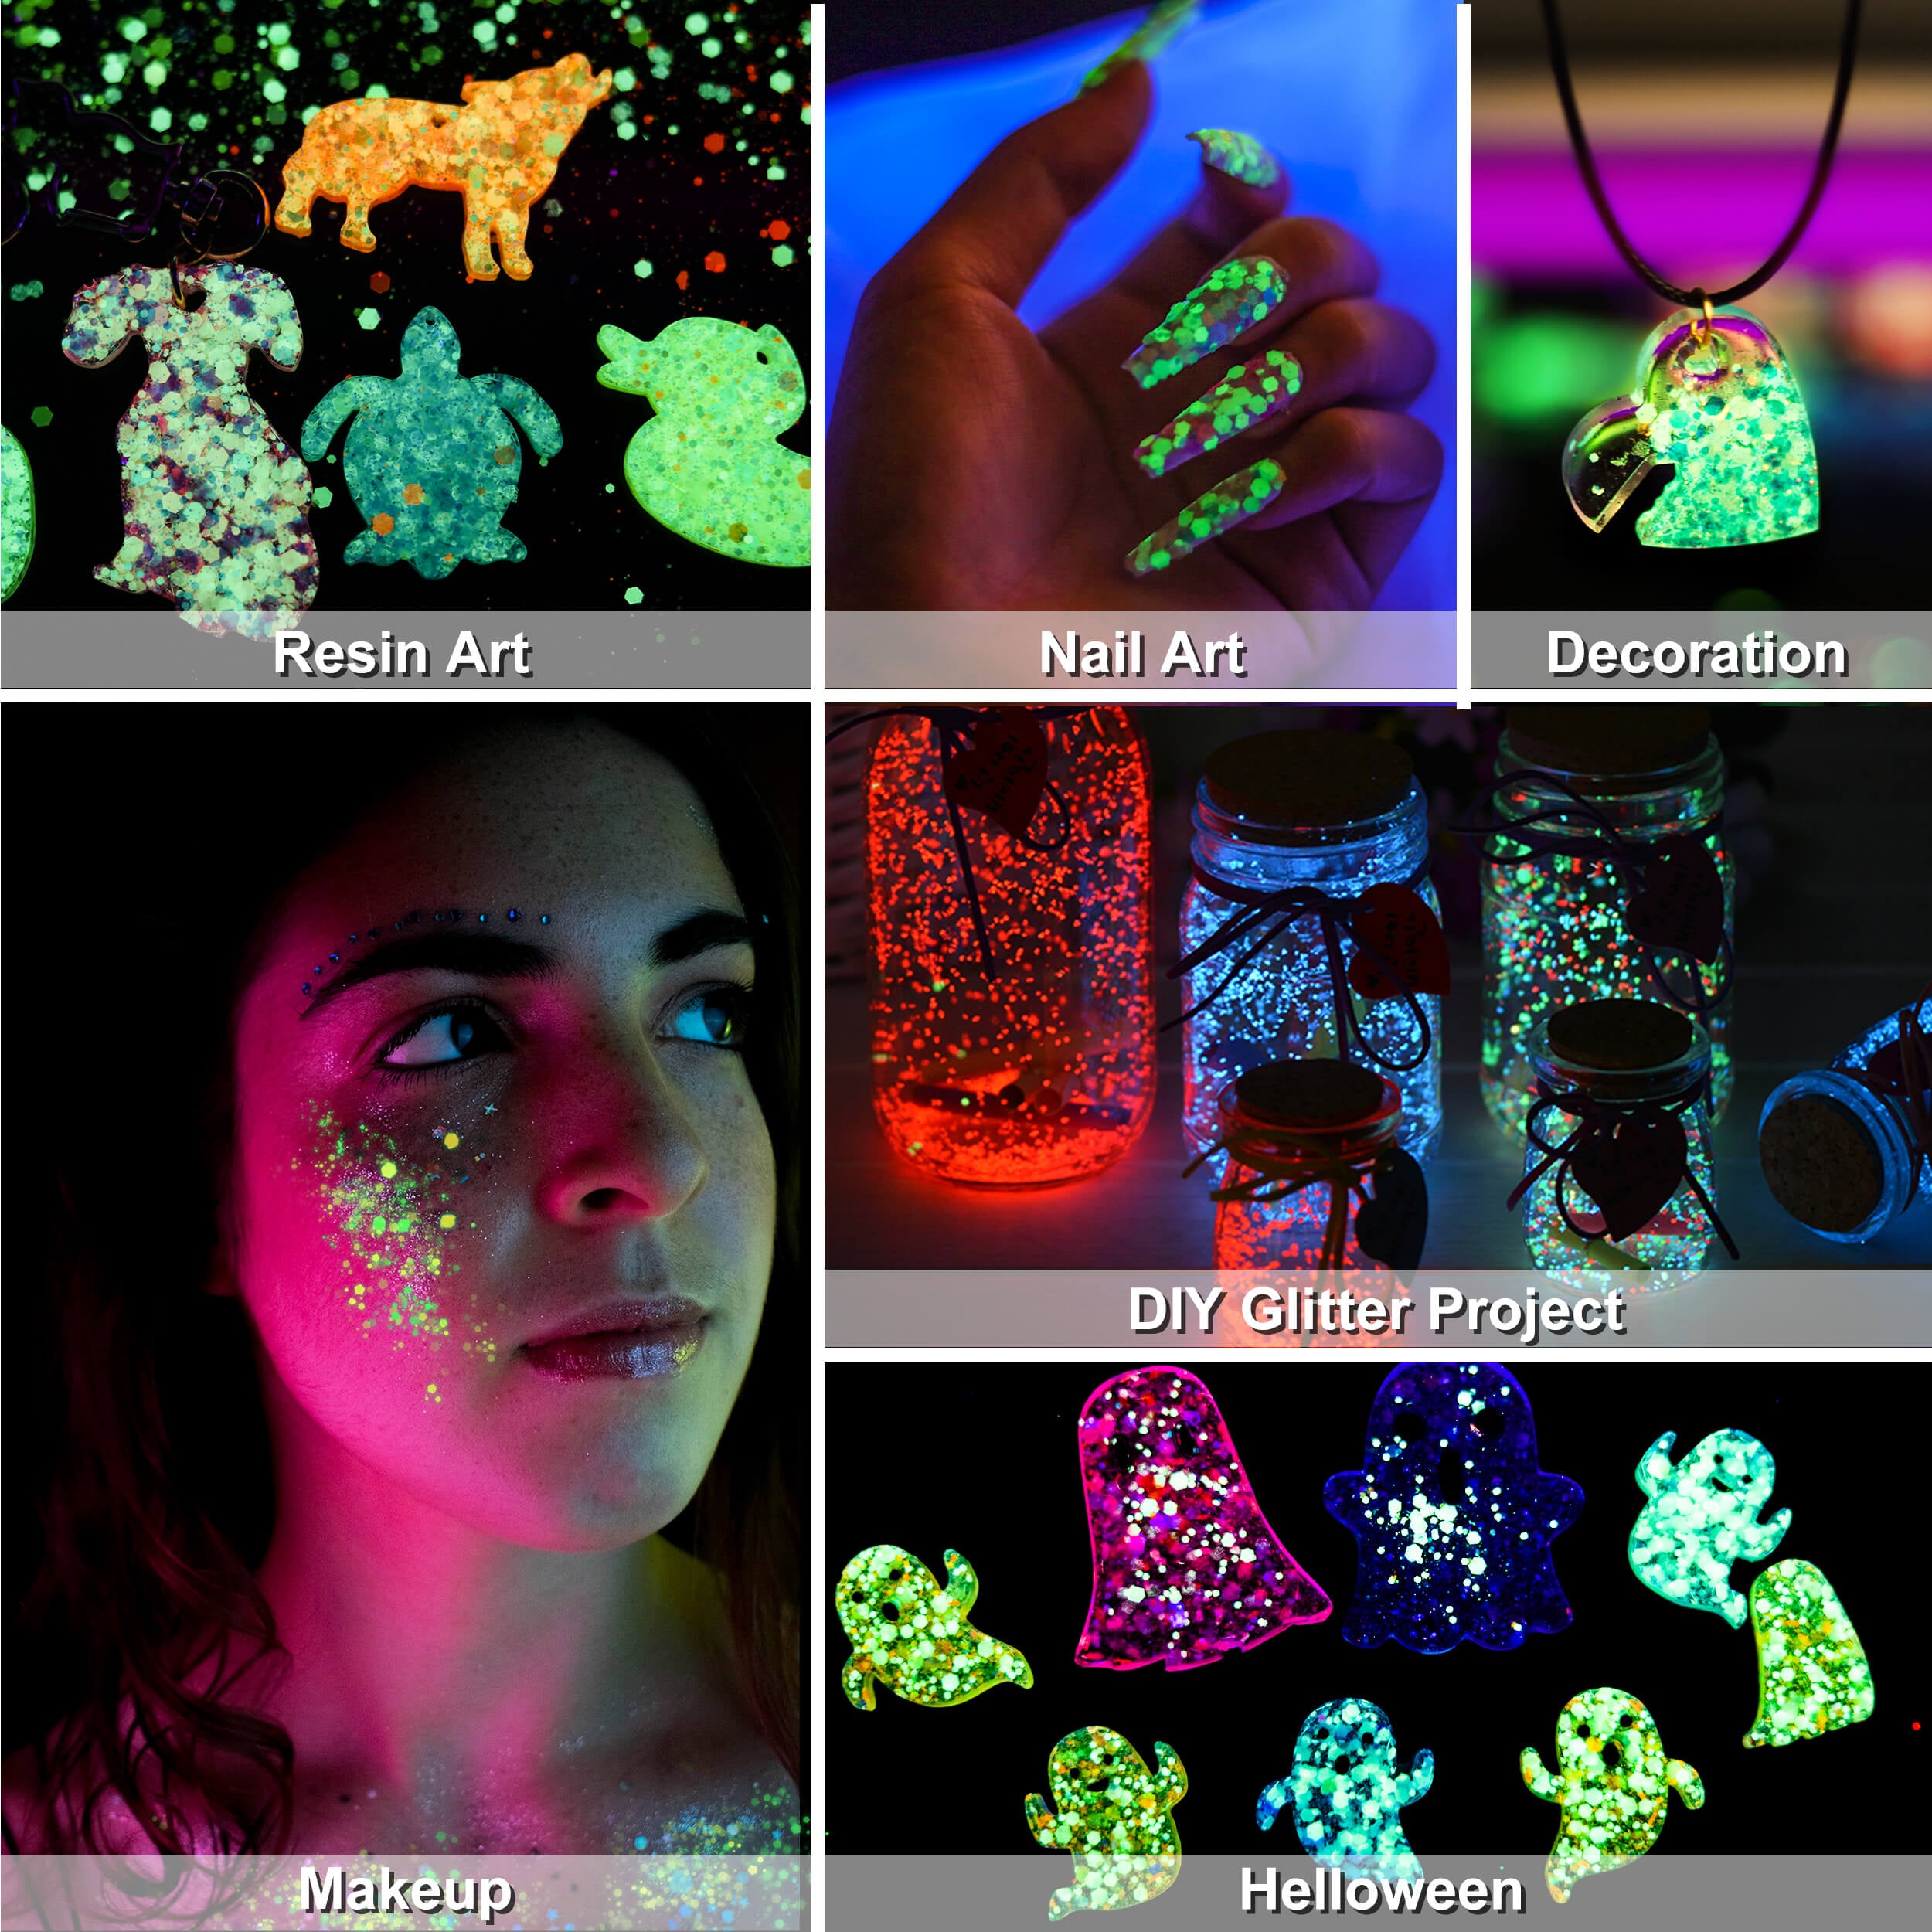 TOP TIPS for 'glow in the dark' resin 